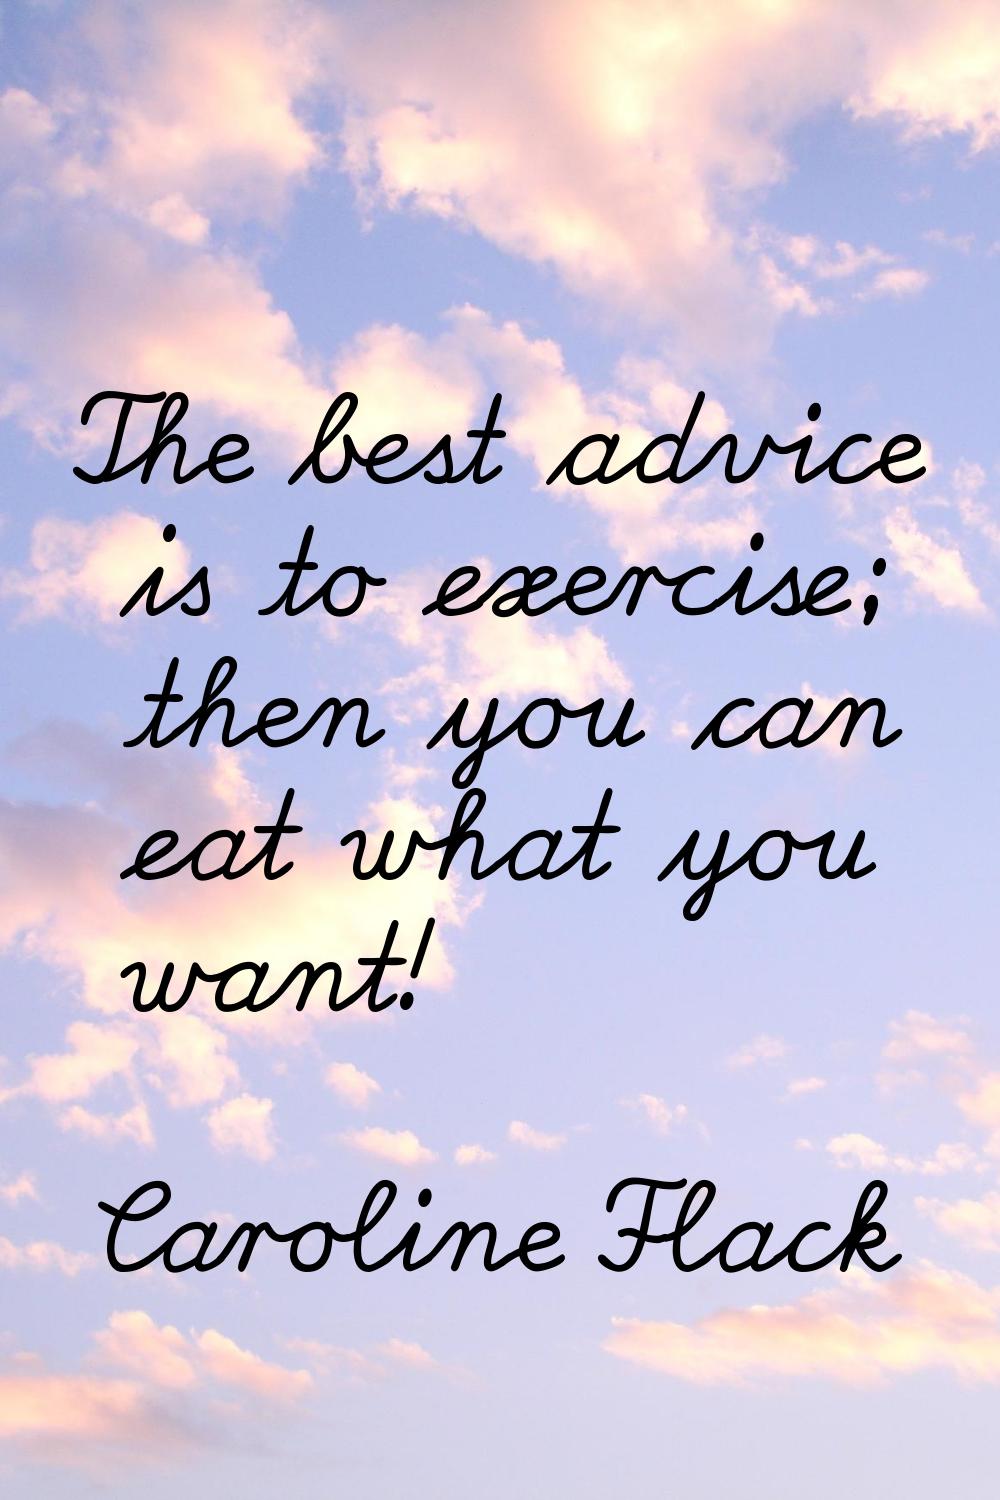 The best advice is to exercise; then you can eat what you want!